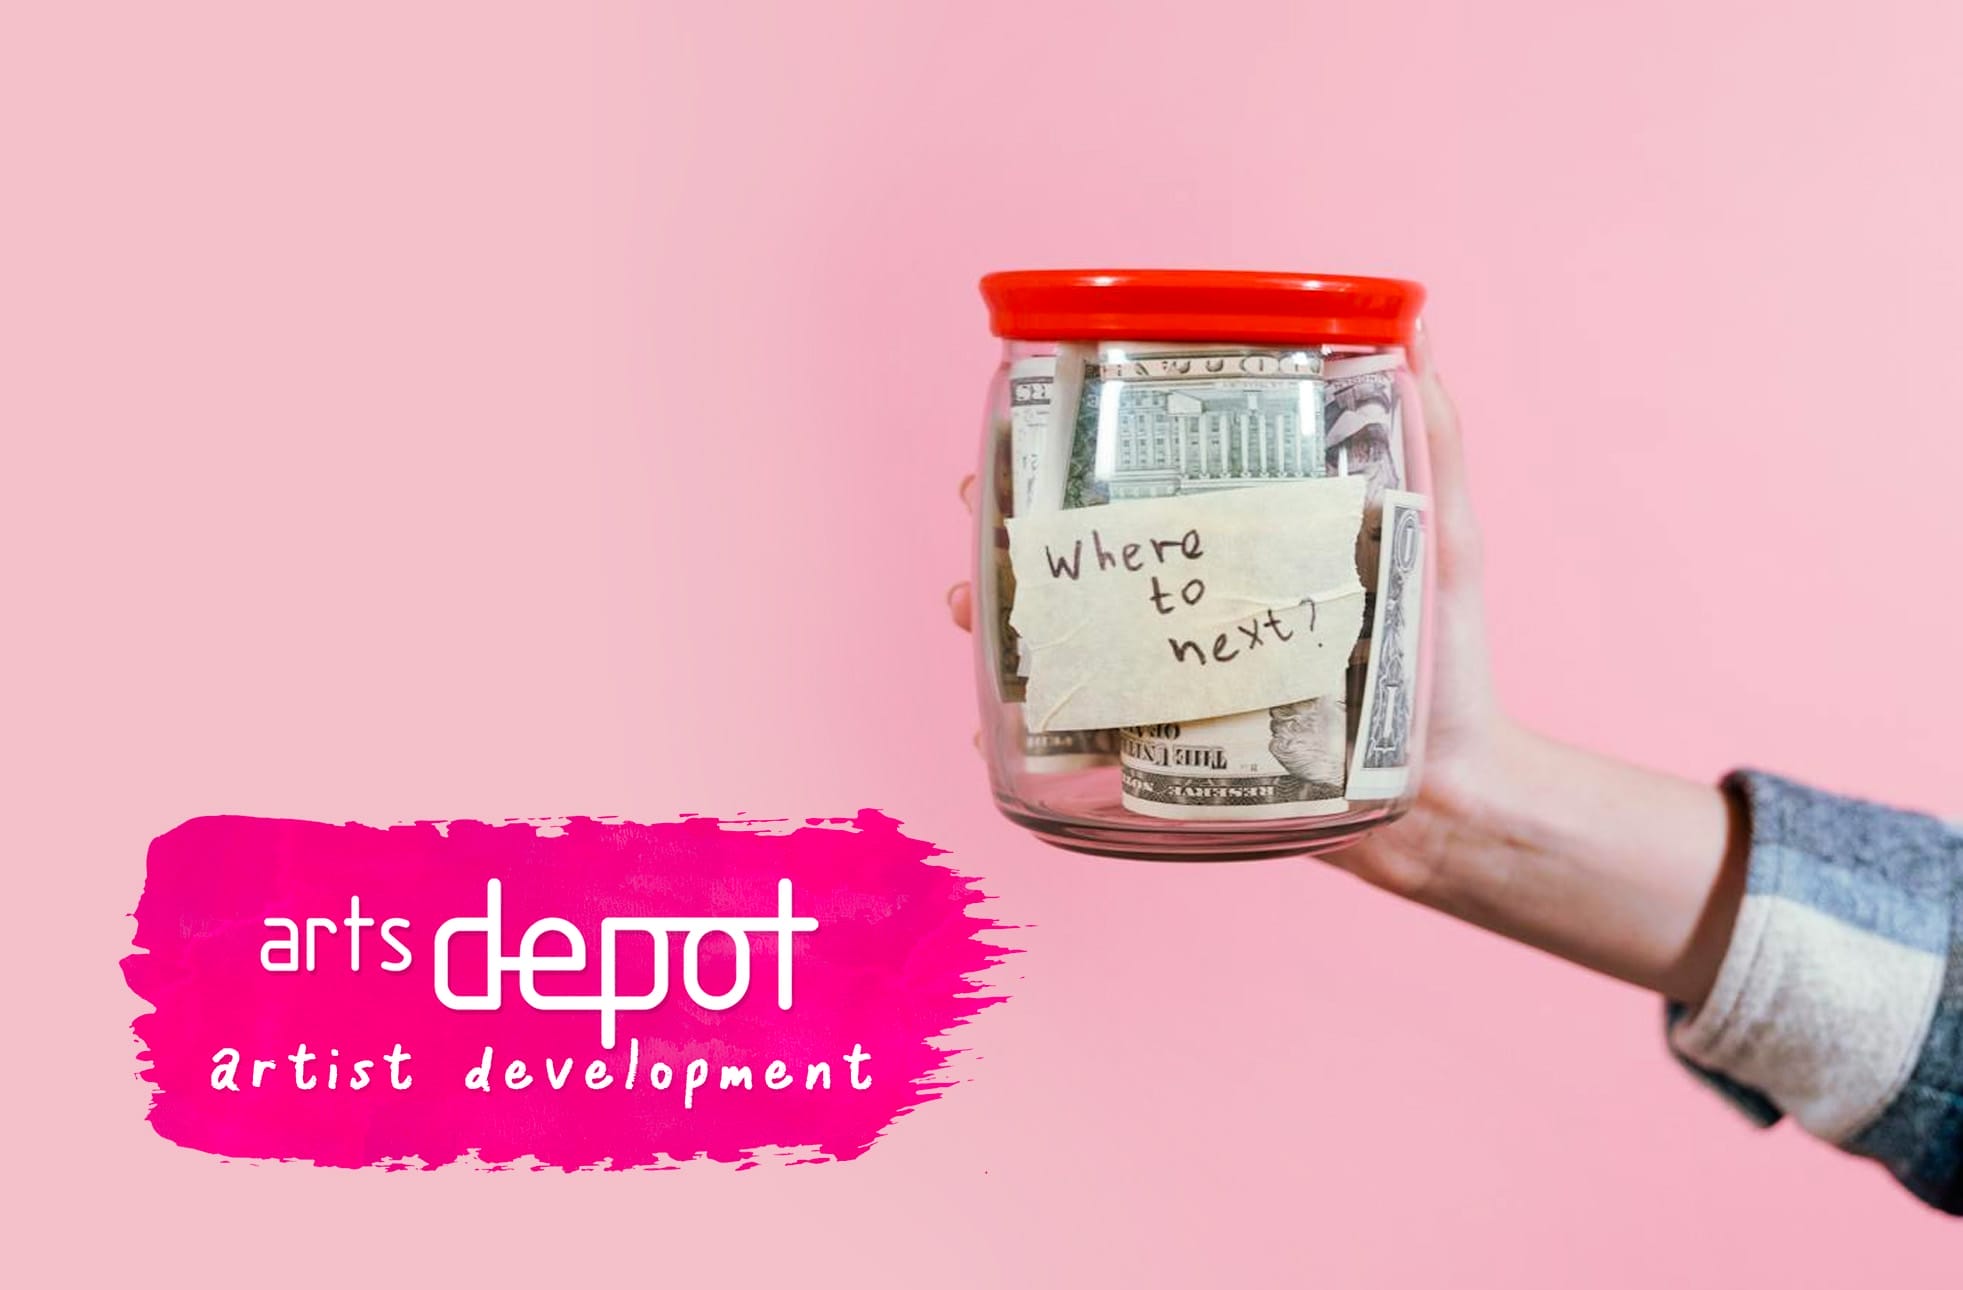 A pale pink background. On the right, a hand is holding a tub full of money, with a sticky note in the middle, saying 'Where to next?' In the bottom left-hand corner, a pink paint stroke logo reads 'artsdepot artist development'.